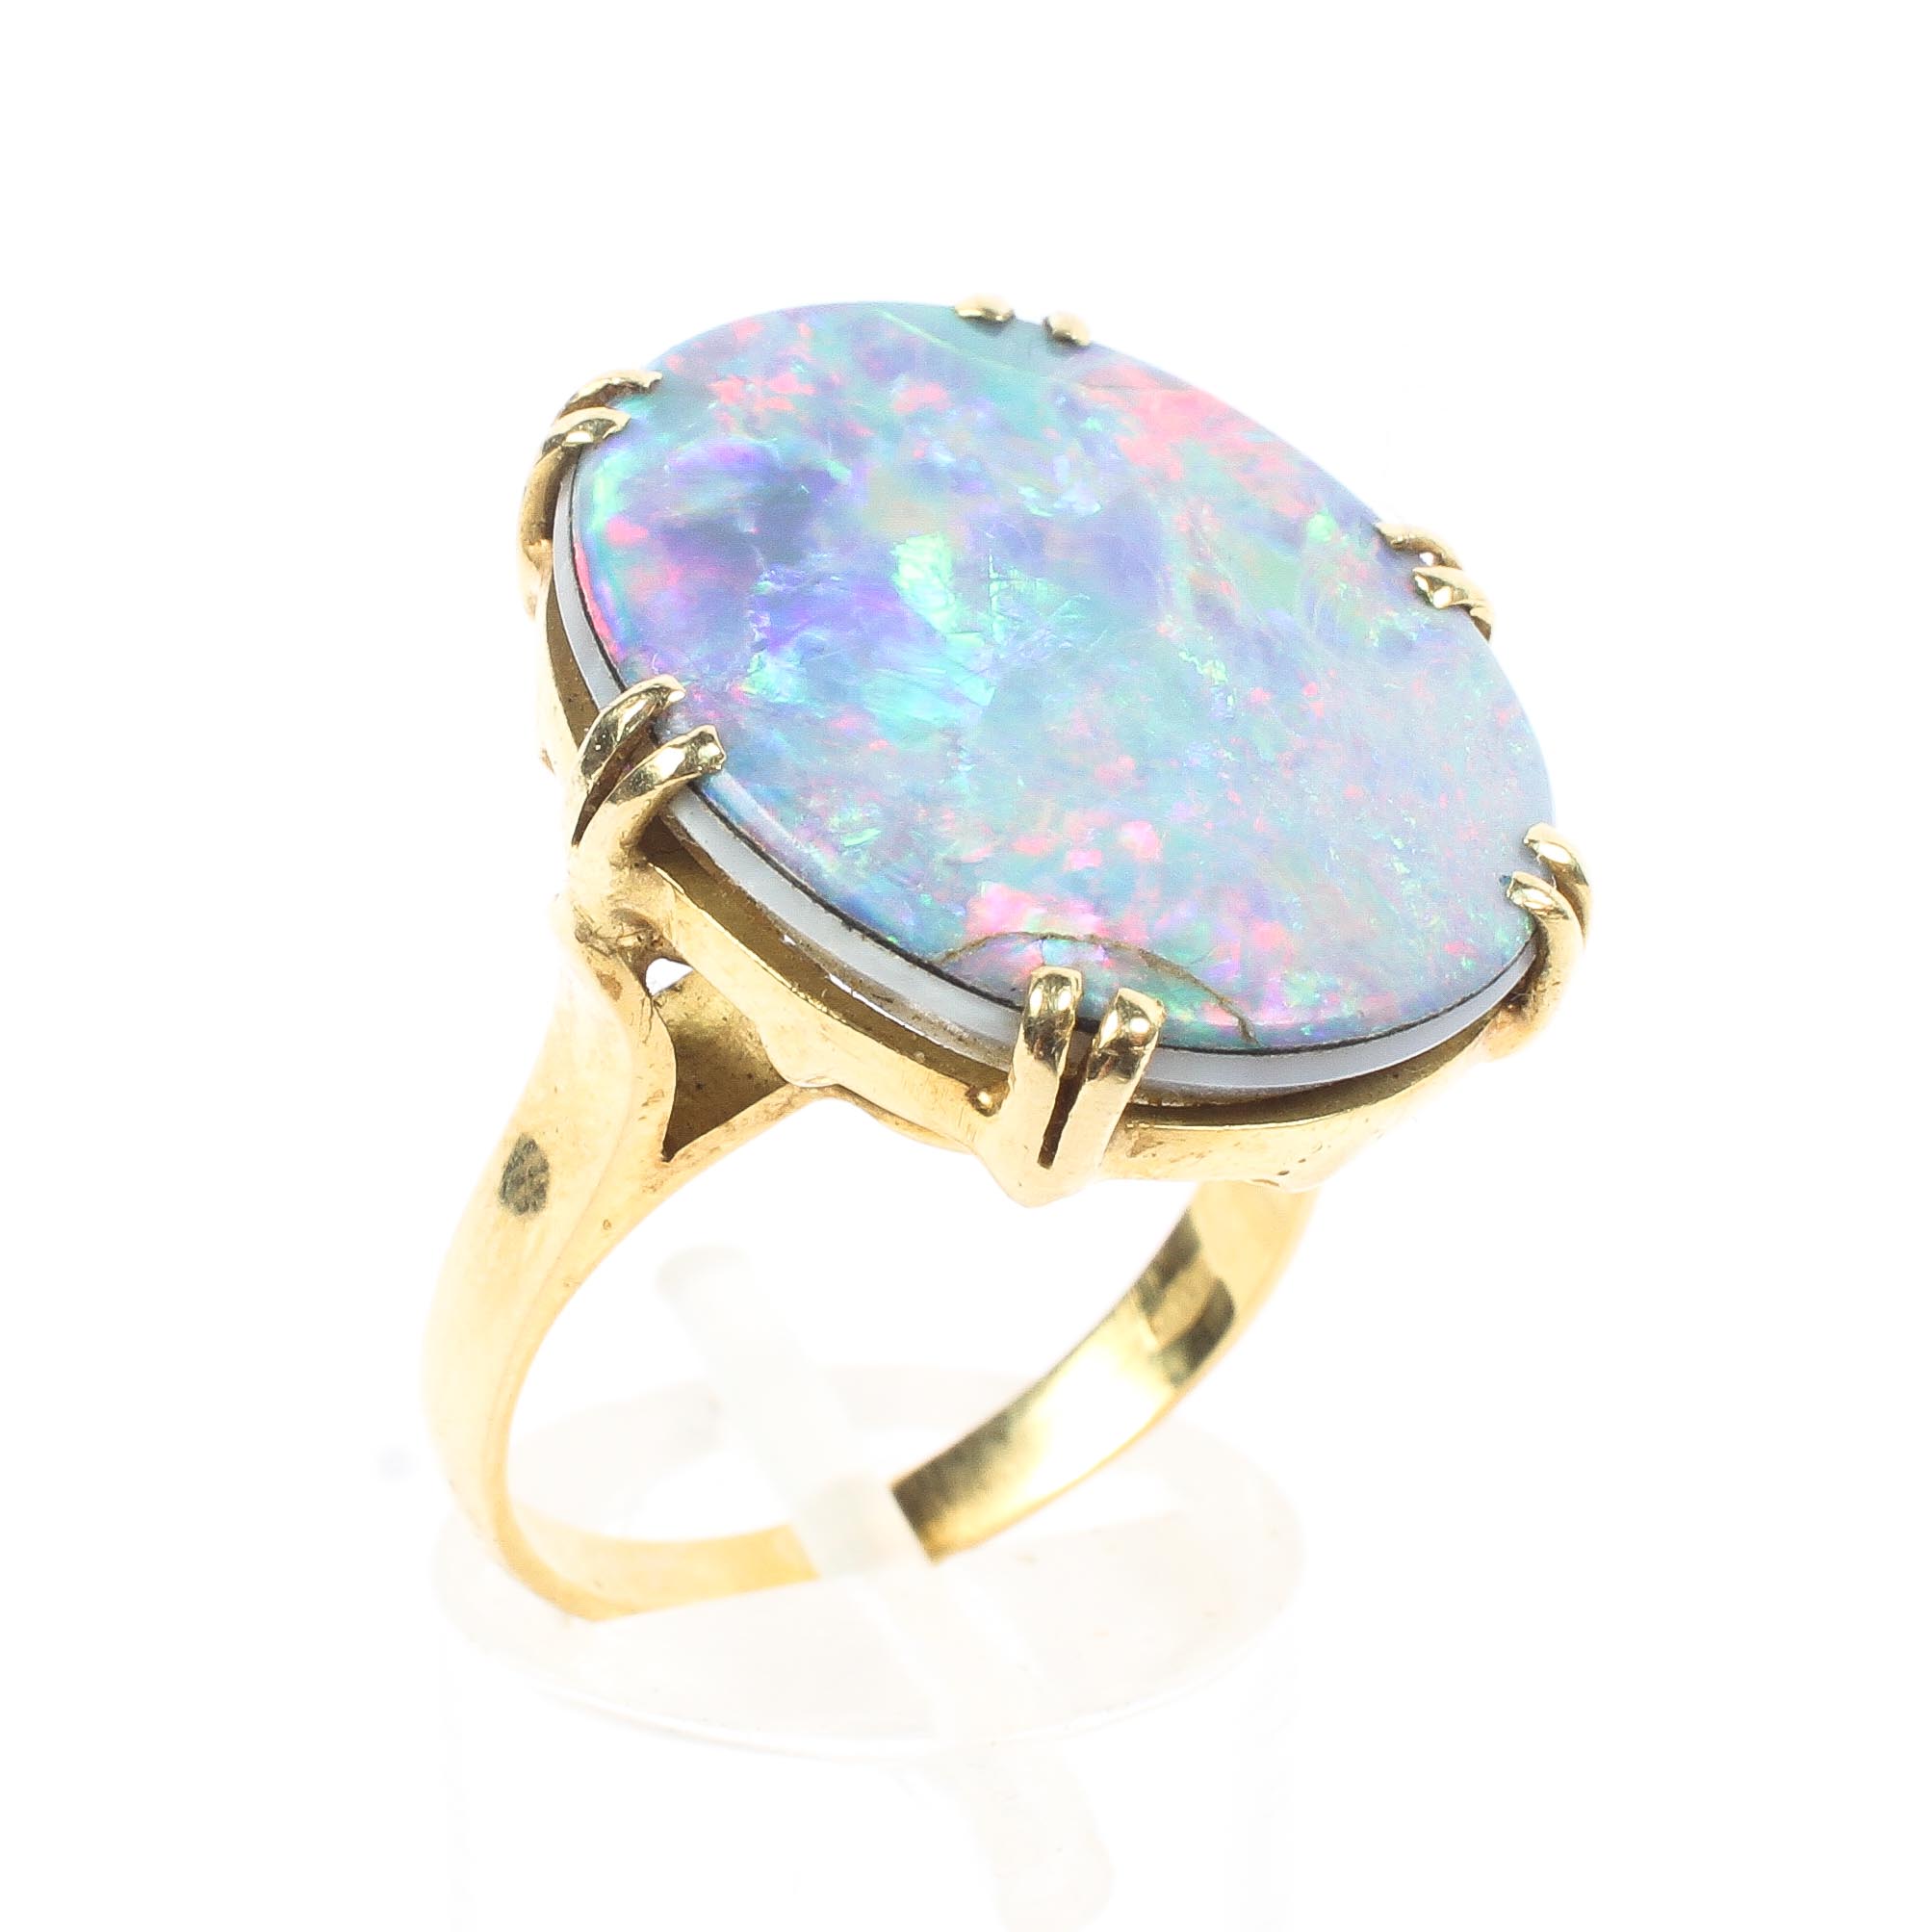 An 18ct gold 750 marked opal doublet ring. Central oval black opal panel in double six claw setting.